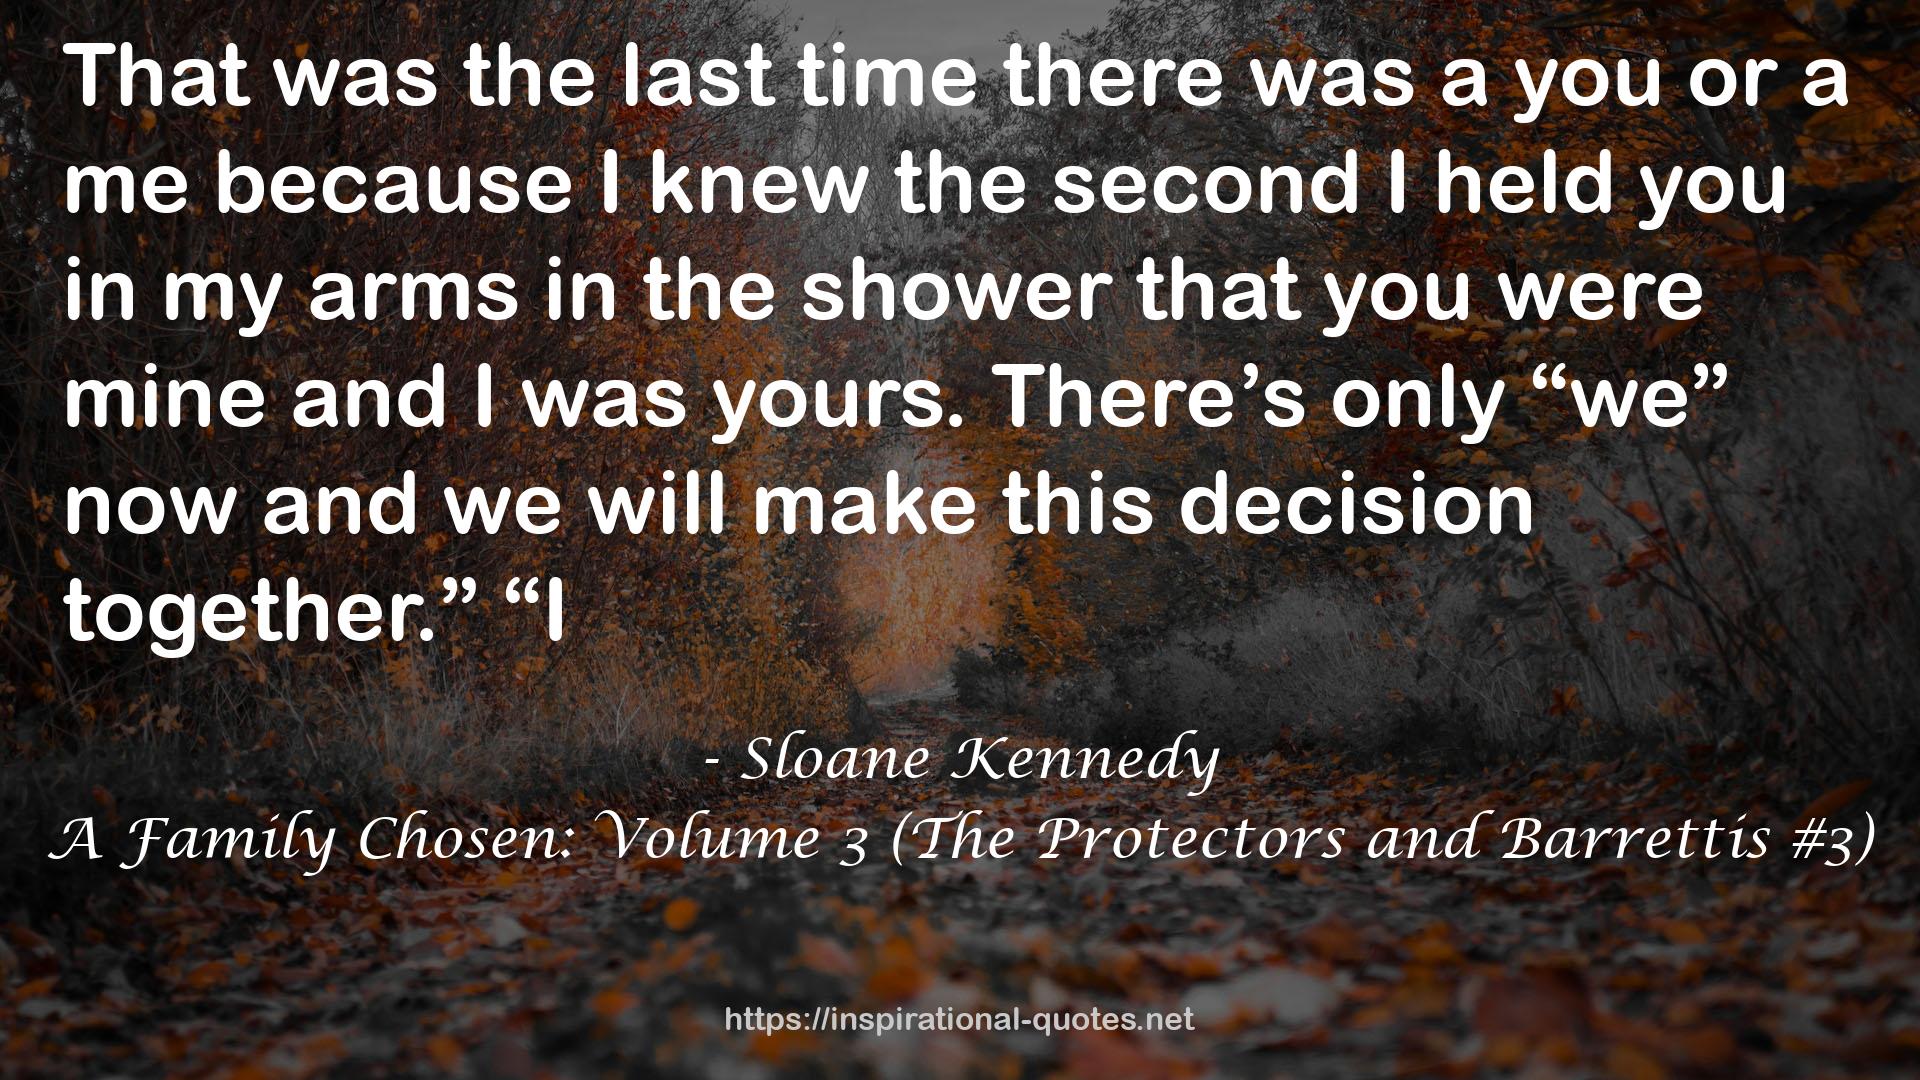 A Family Chosen: Volume 3 (The Protectors and Barrettis #3) QUOTES